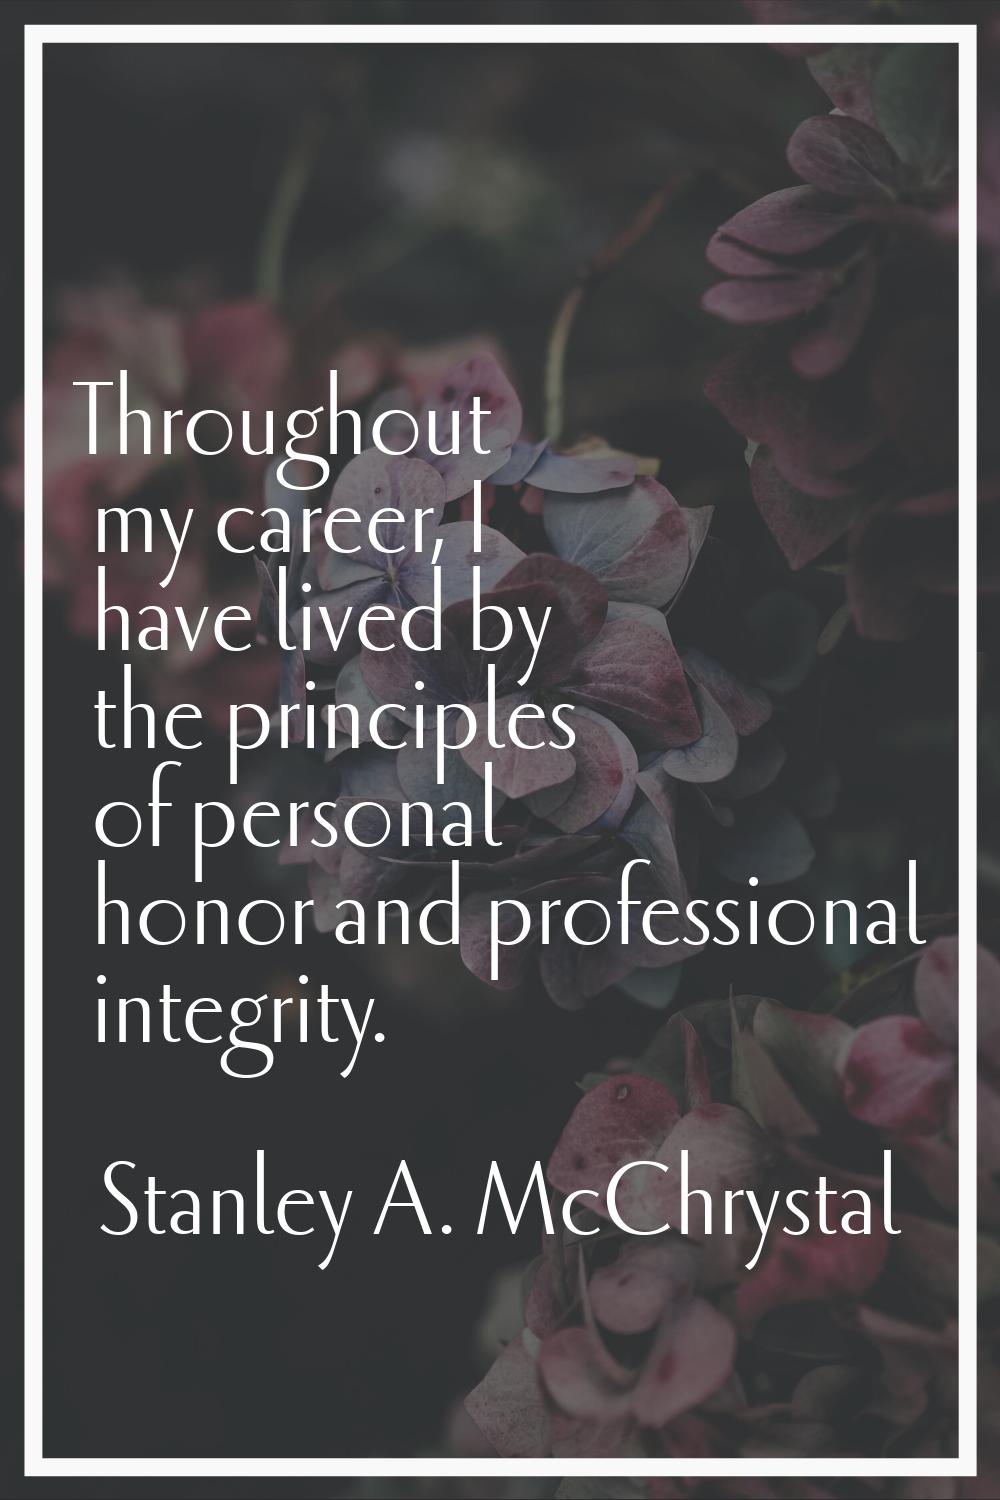 Throughout my career, I have lived by the principles of personal honor and professional integrity.